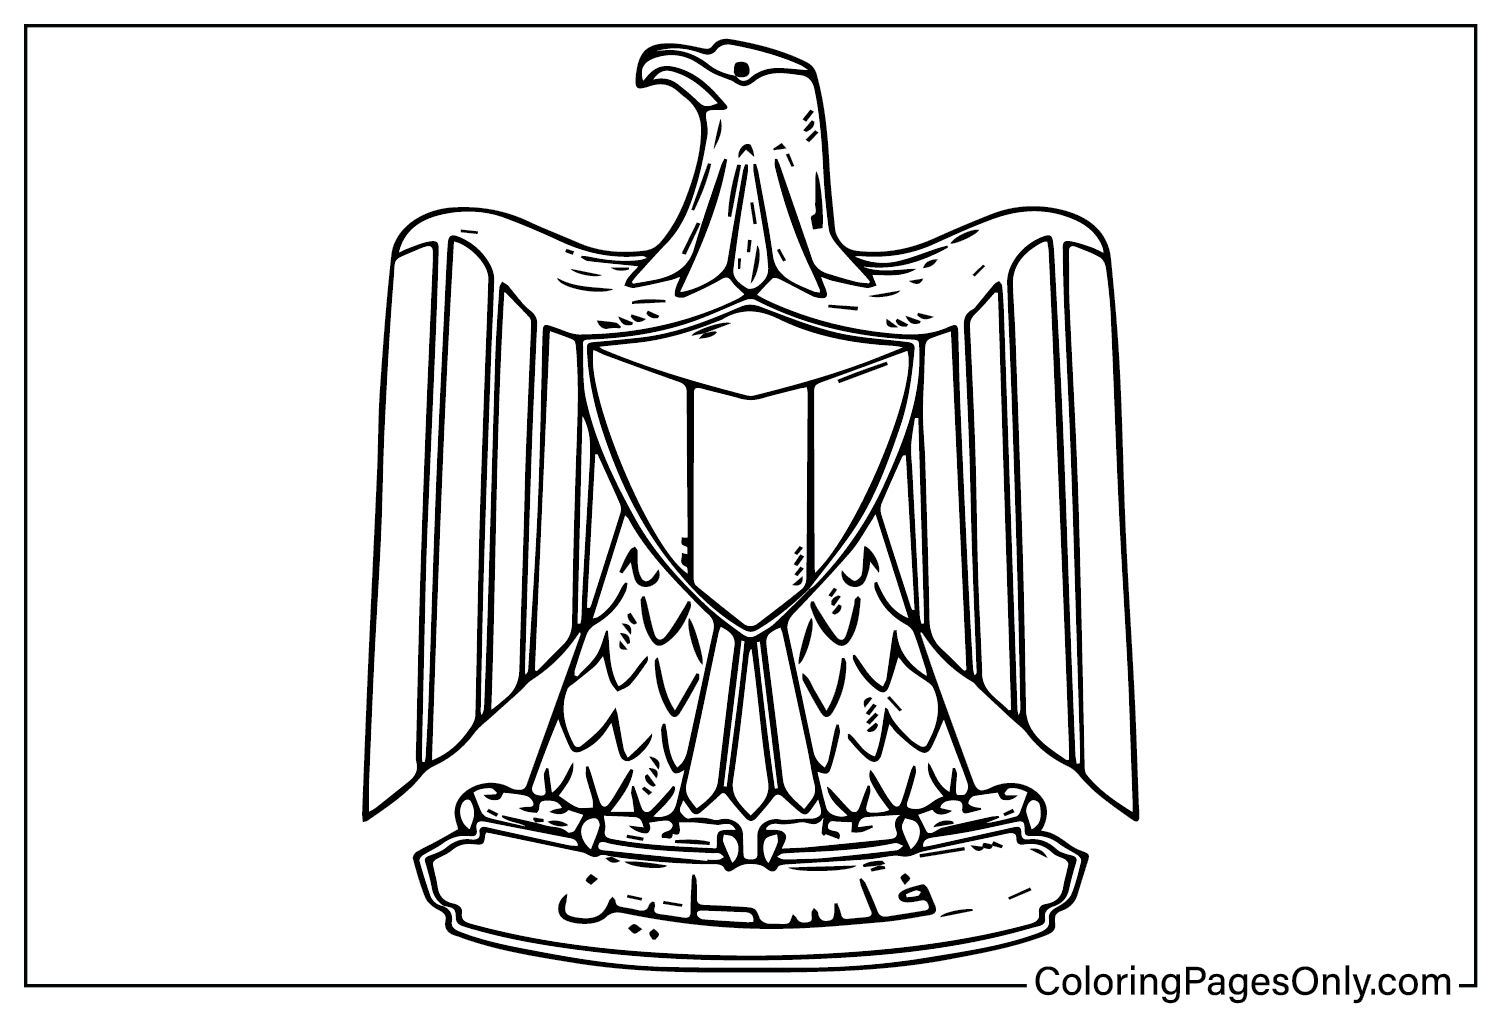 Coat of arms of Palestine Coloring Page from Palestine